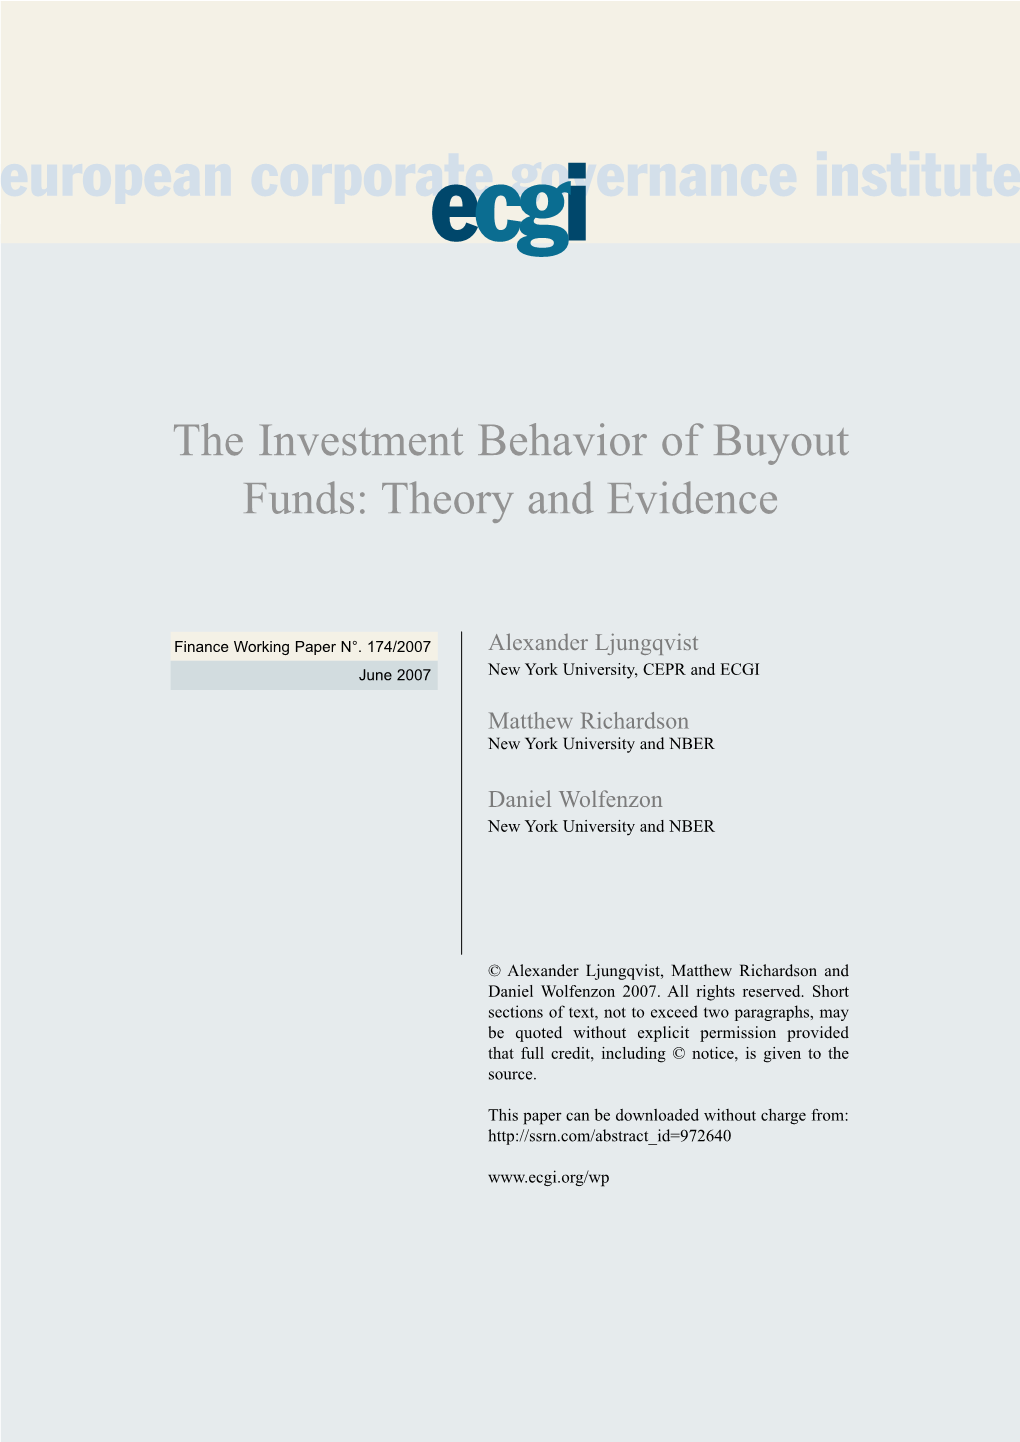 The Investment Behavior of Buyout Funds: Theory and Evidence